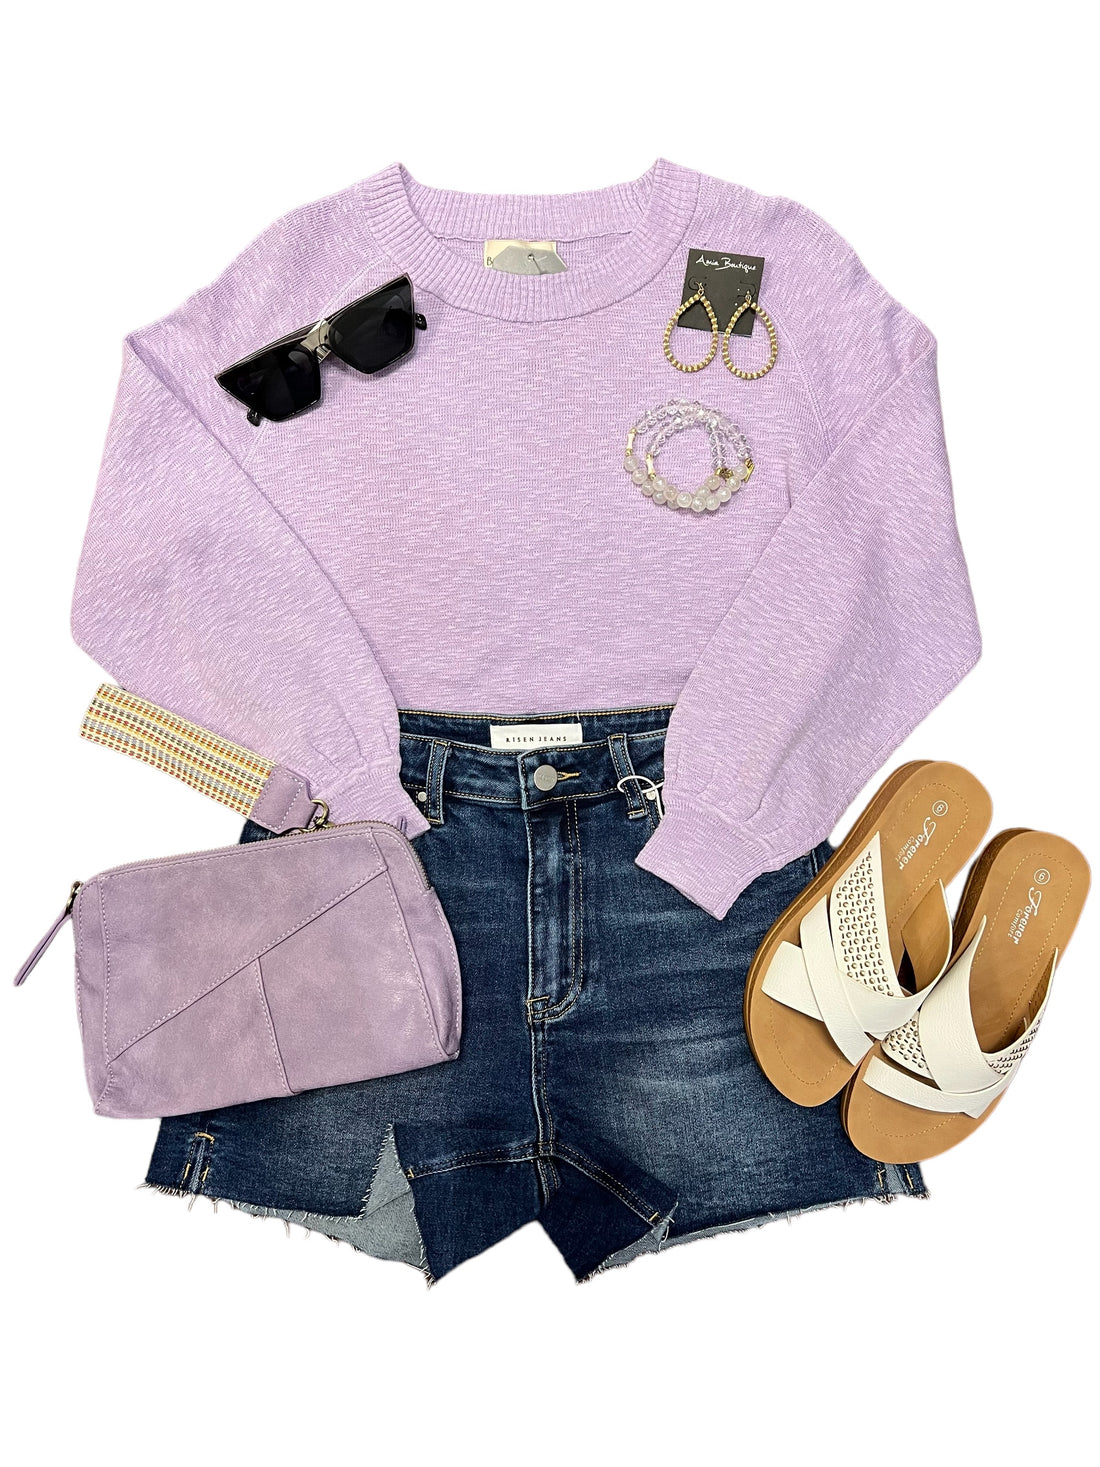 The Bailey Lavender Sweater